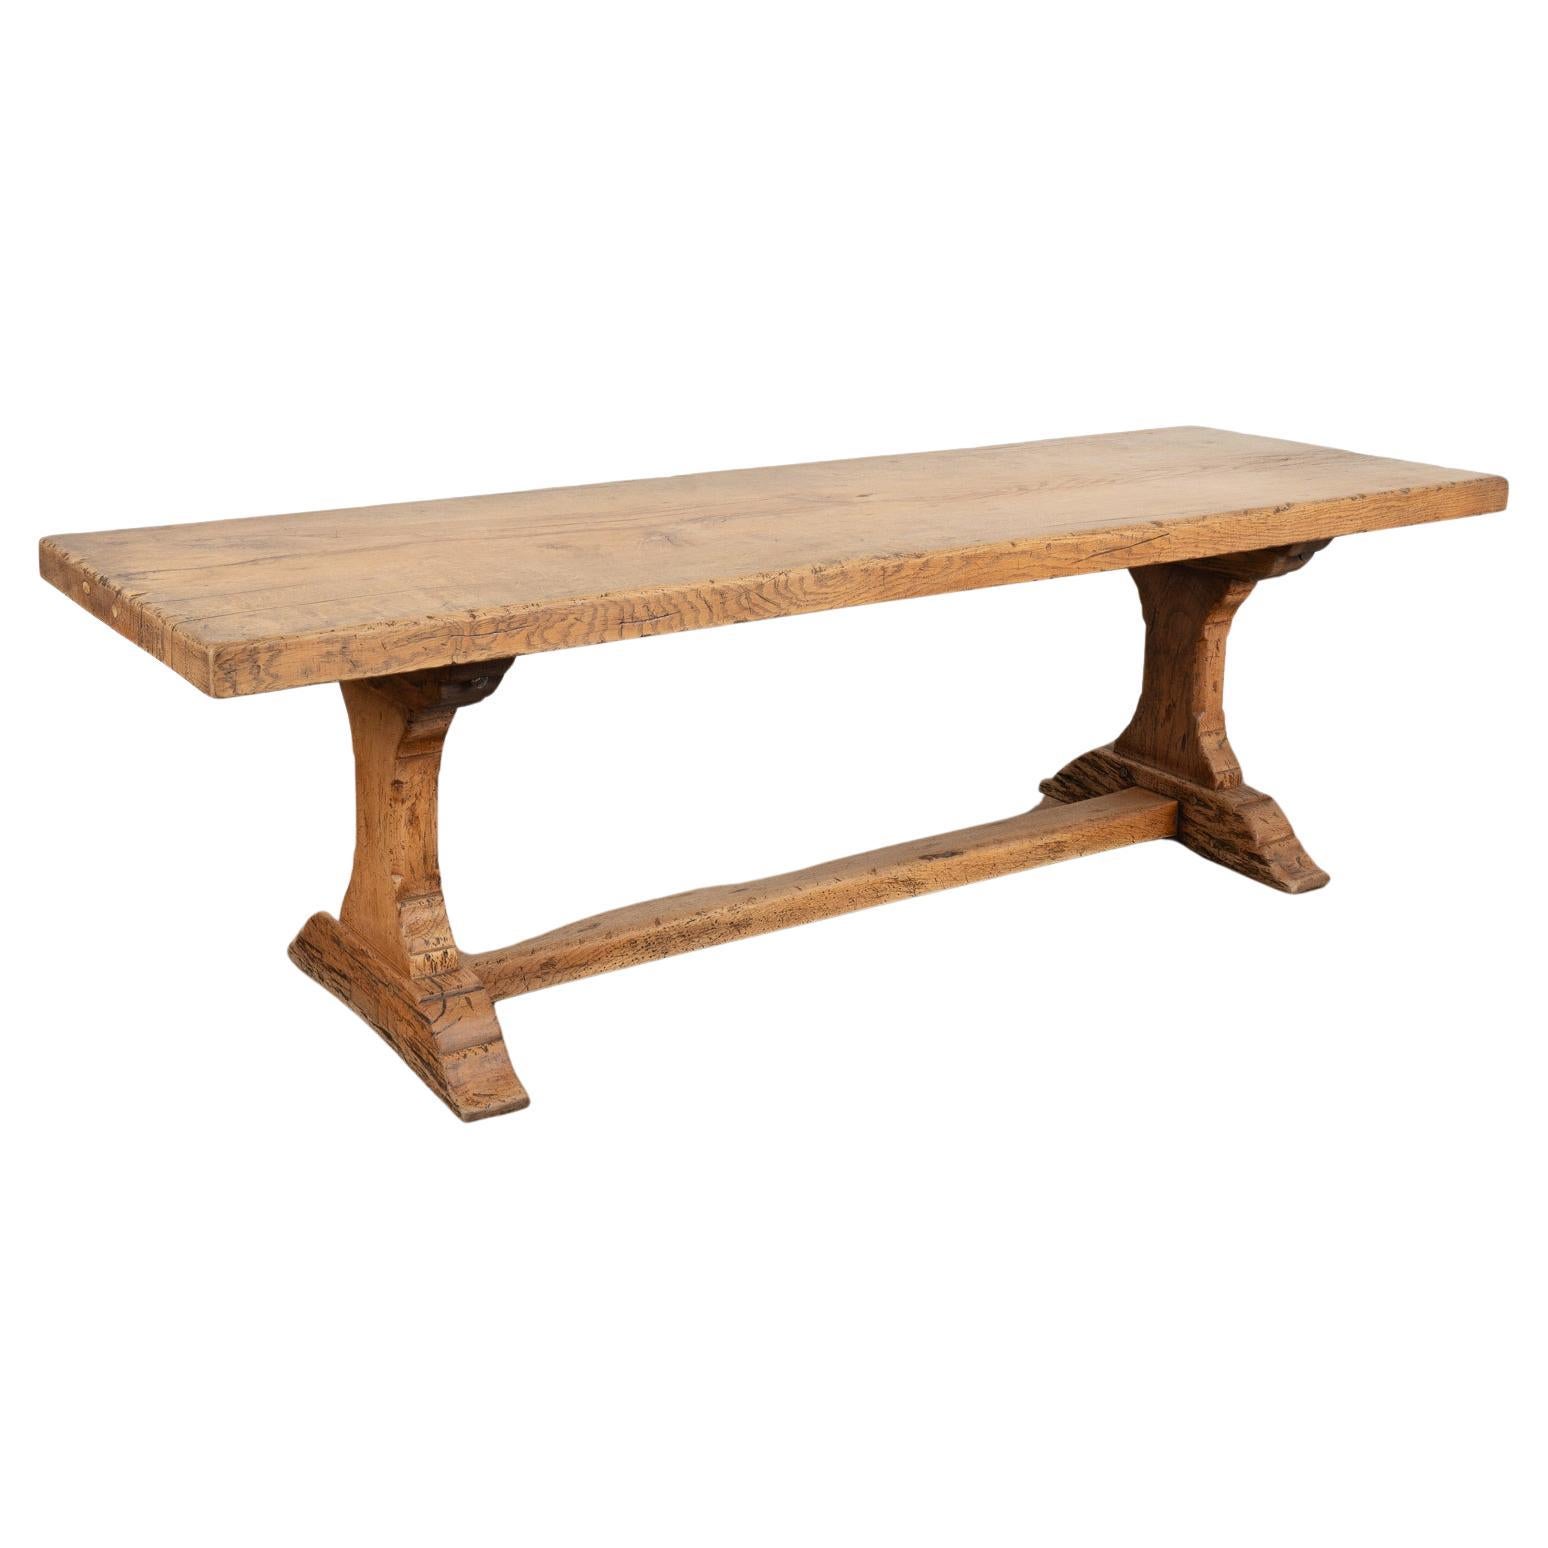 French Country Oak Dining Table, circa 1900-20 For Sale